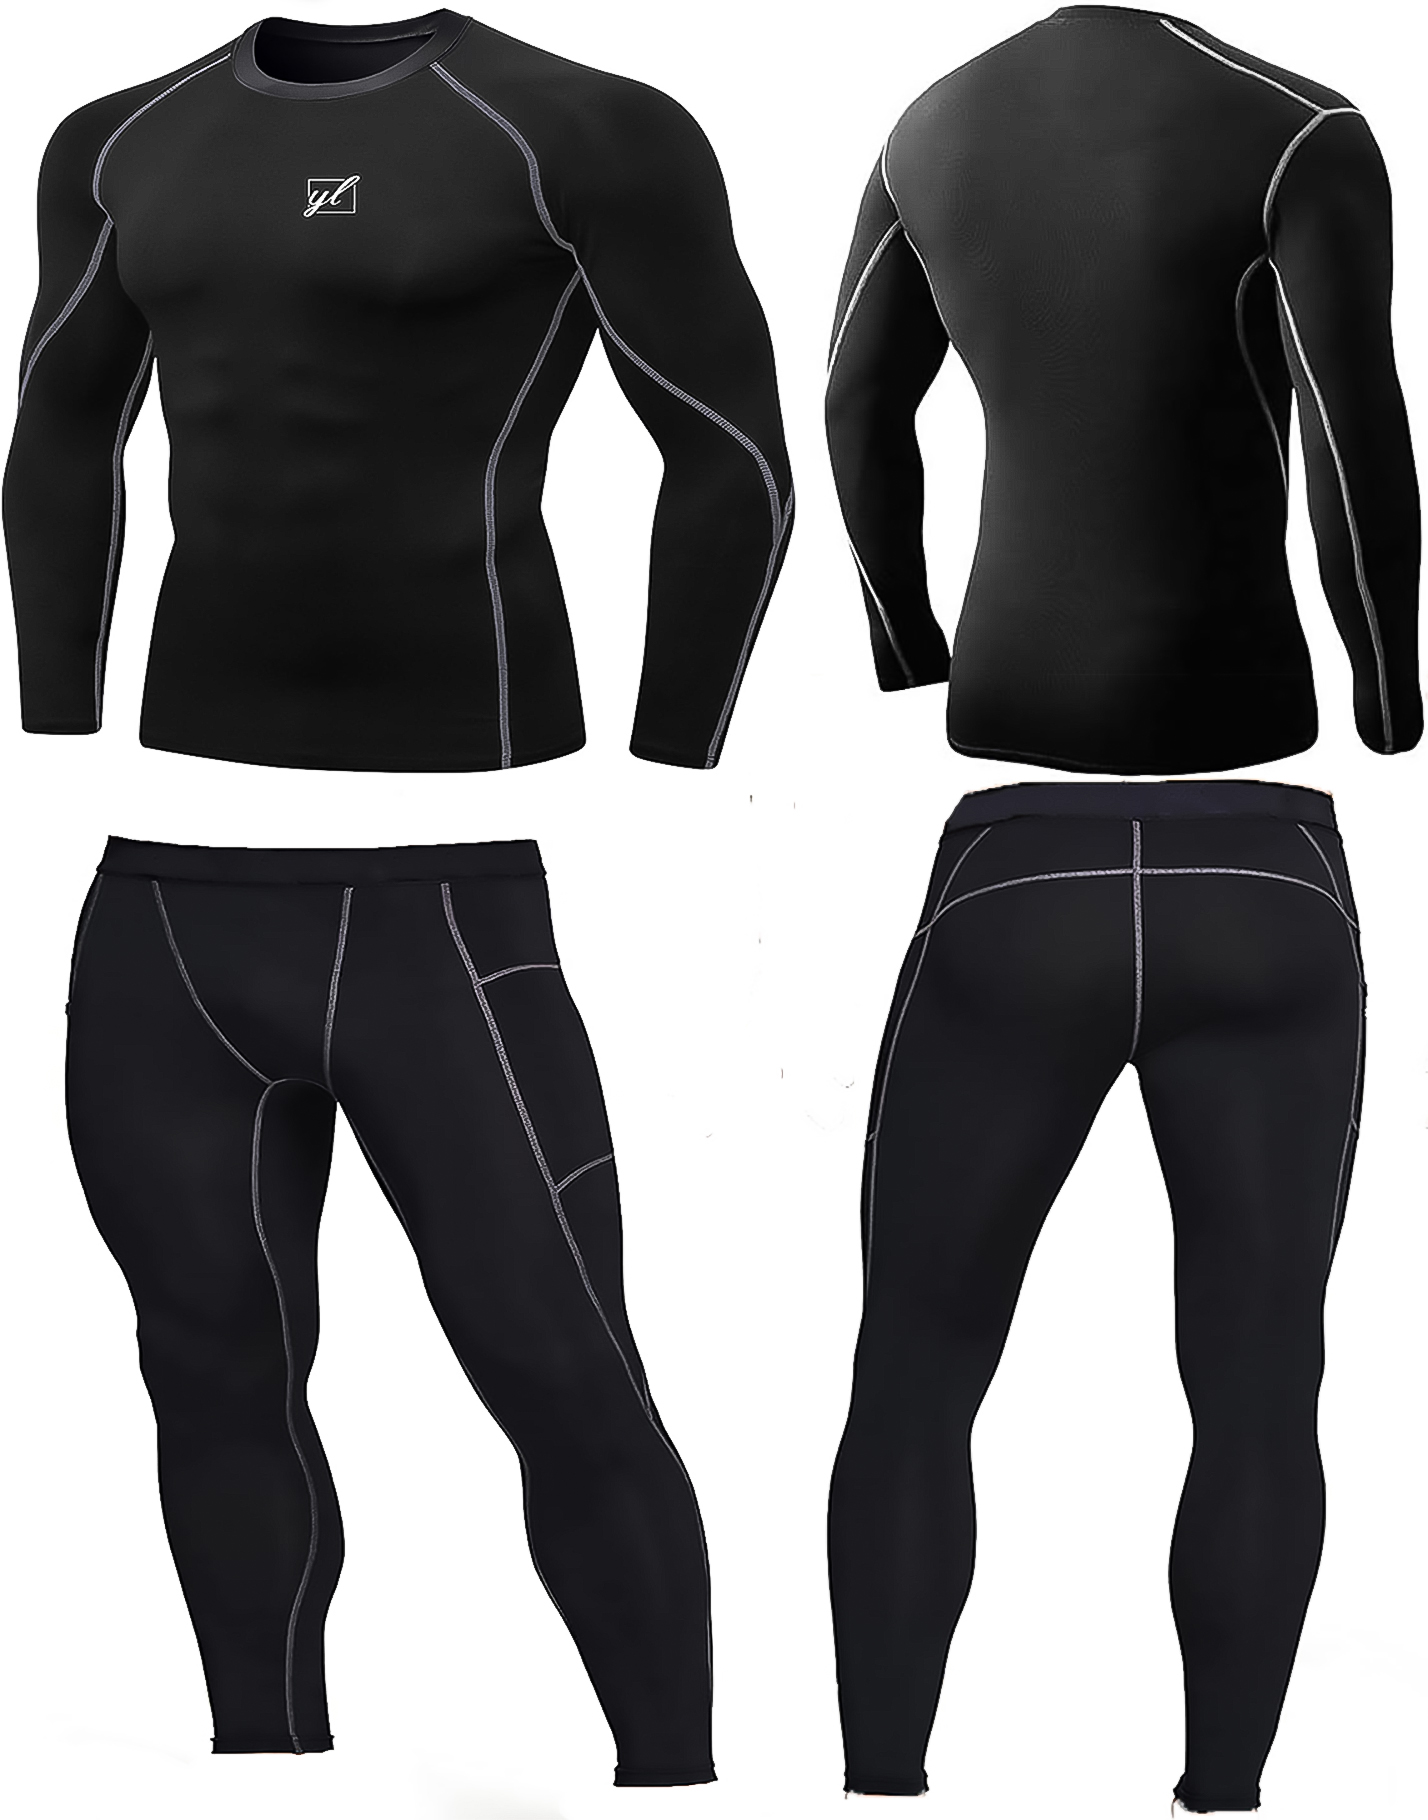 Men's Compression Tights -Combo: Top and Bottom with silver Stiches 